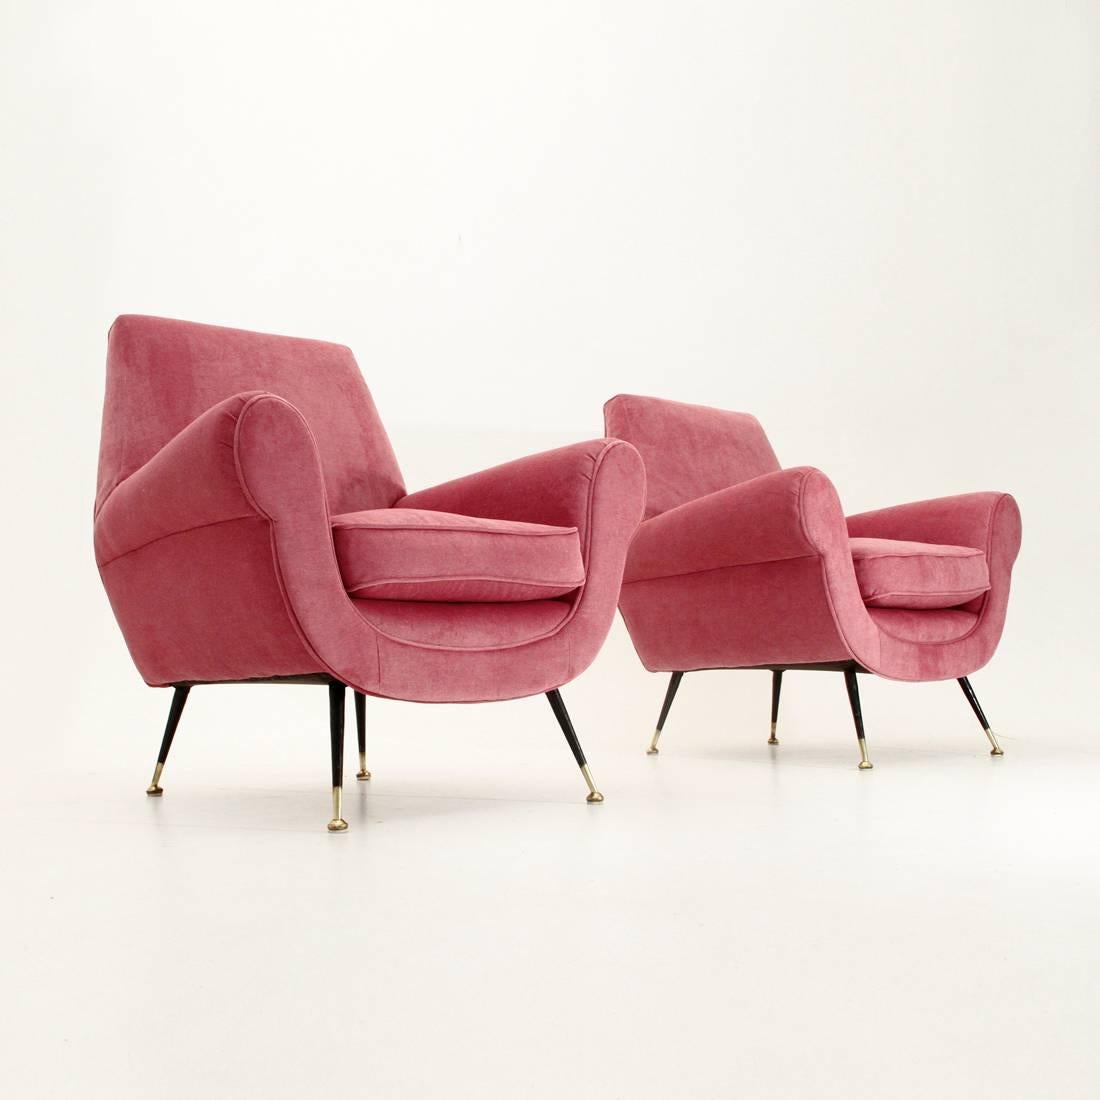 Two Italian armchairs, 1950s.
Upholstered and lined wooden structure with new pink velvet fabric.
Sitting with removable cushion pads.
Spiked legs in black painted metal with brass terminals.
Very good condition.
Dimensions: Width 90 cm, depth